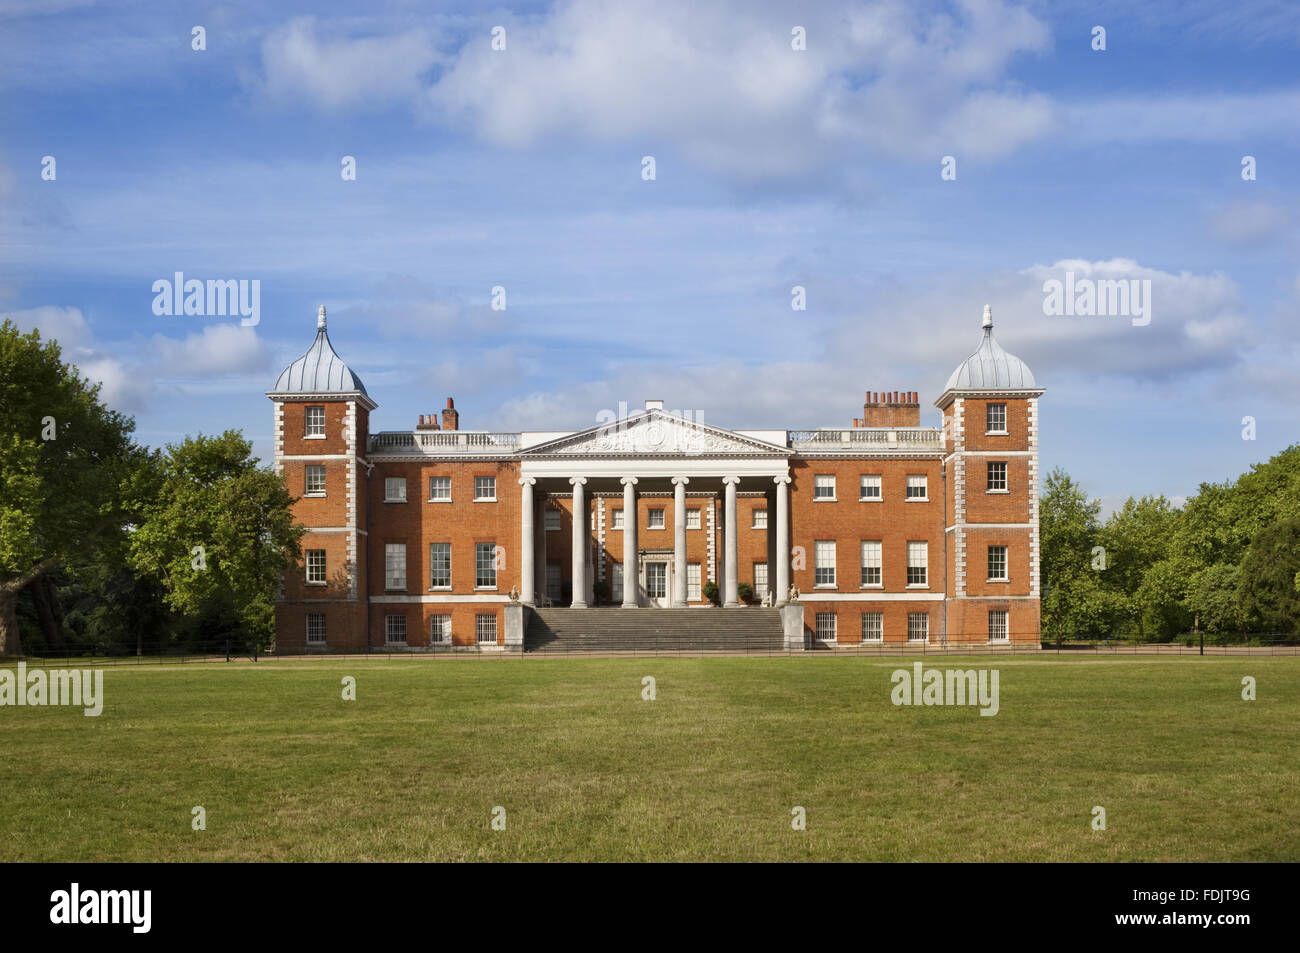 The east front with the 'transparent' portico at Osterley, Middlesex. The house, originally Elizabethan, was remodelled in 1760 - 80 by Robert Adam. Stock Photo